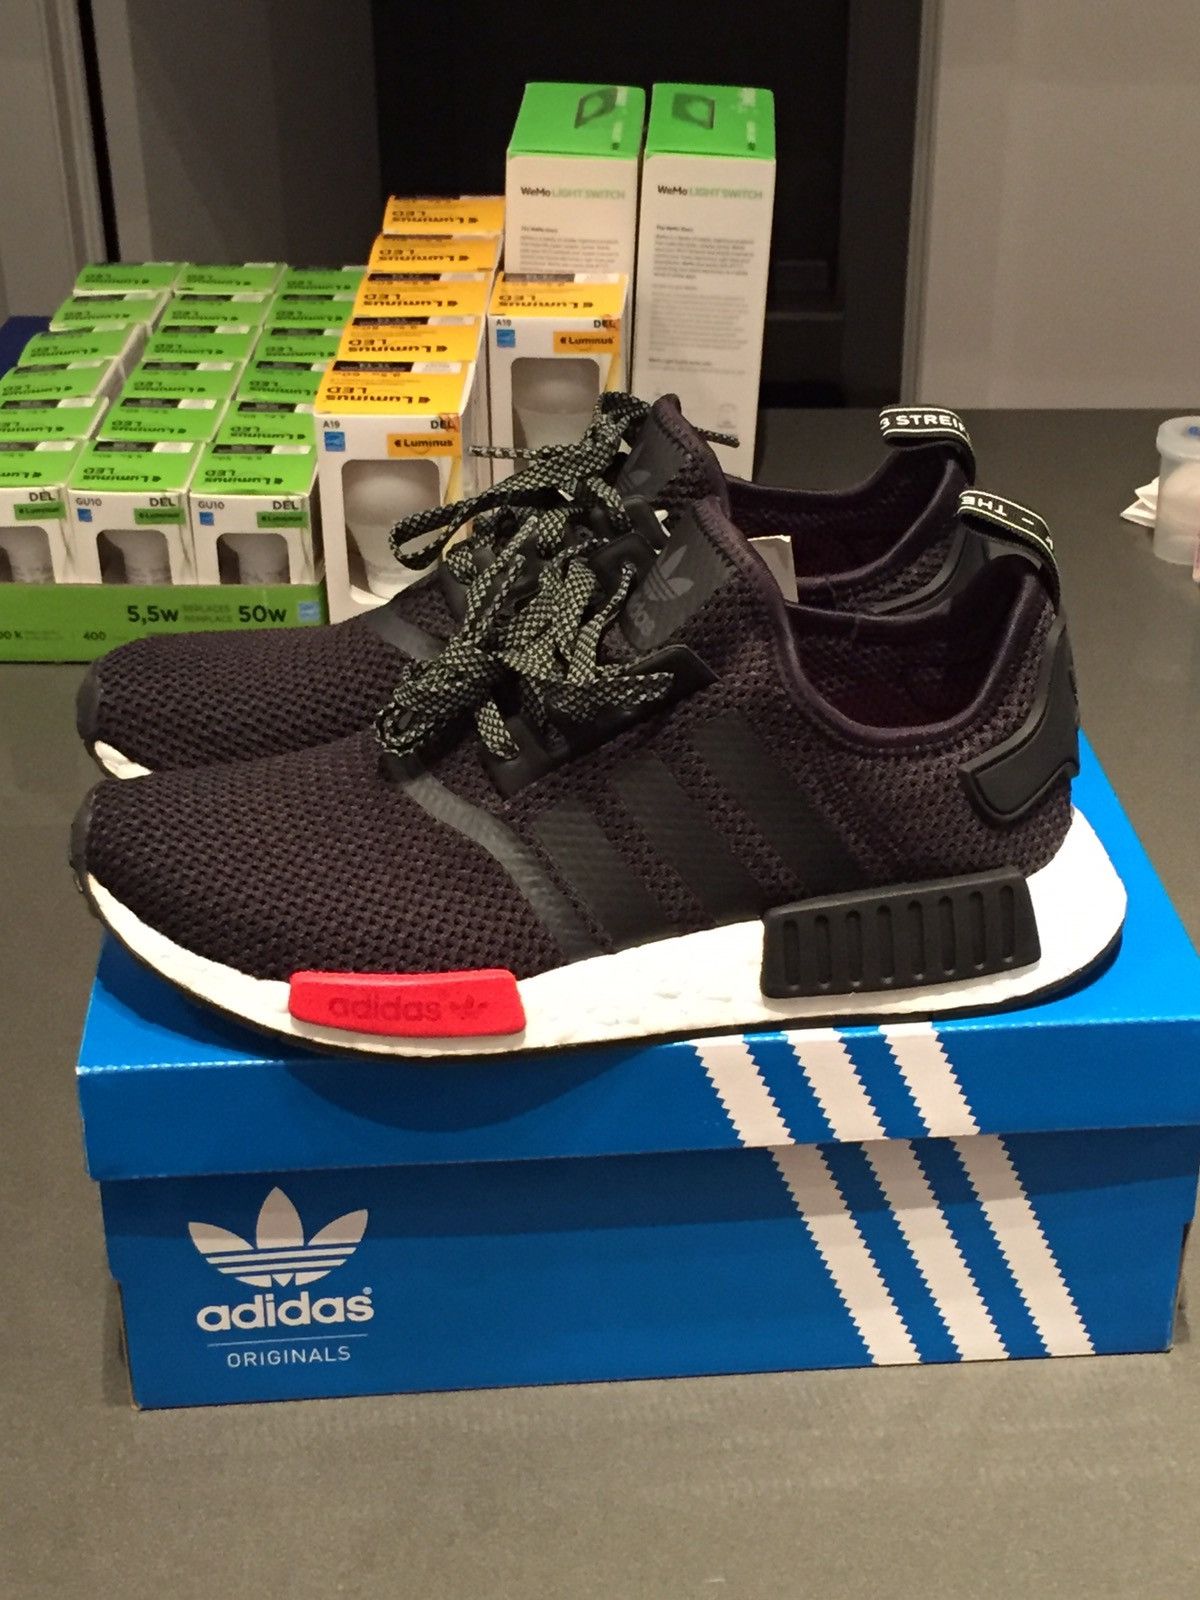 Adidas NMD "Footlocker Exclusive" Size US 9 / EU 42 - 2 Preview